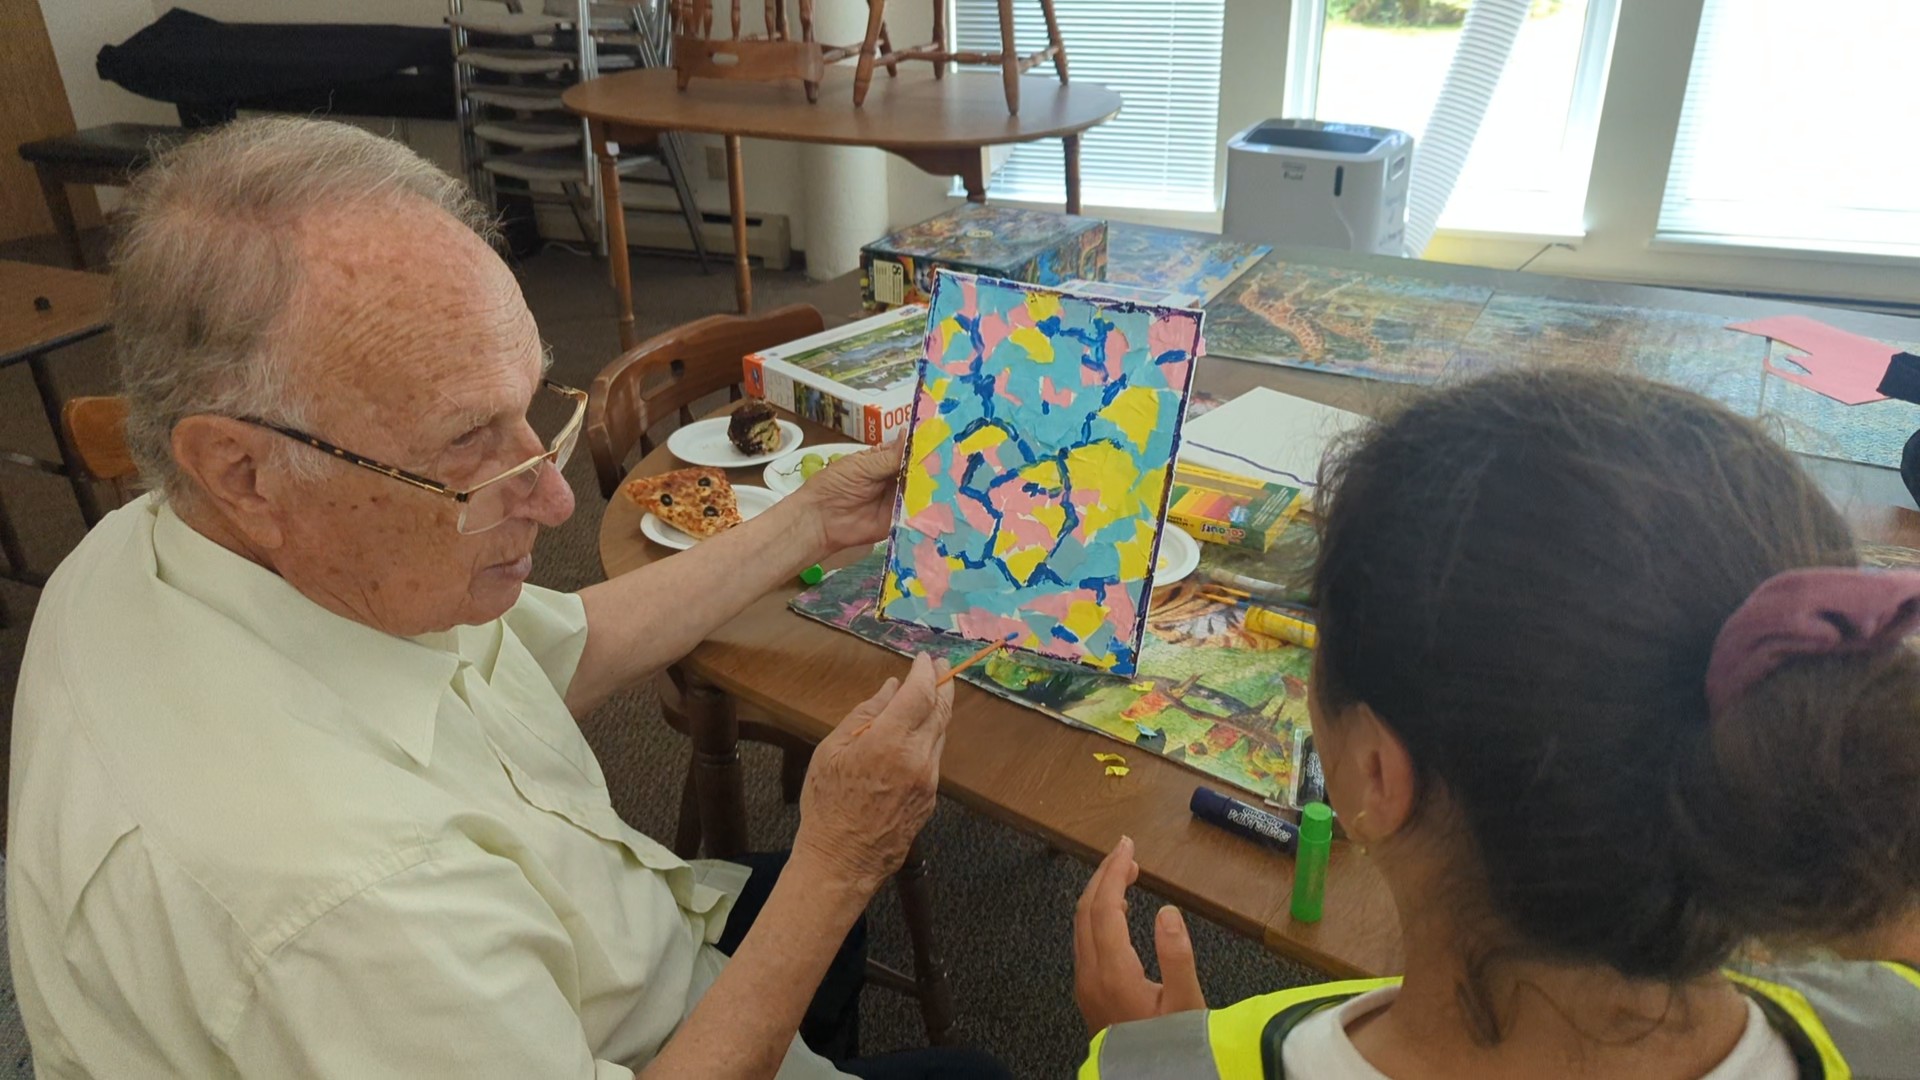 A senior man provides some feedback to a participant as they look over her very colourful artwork.